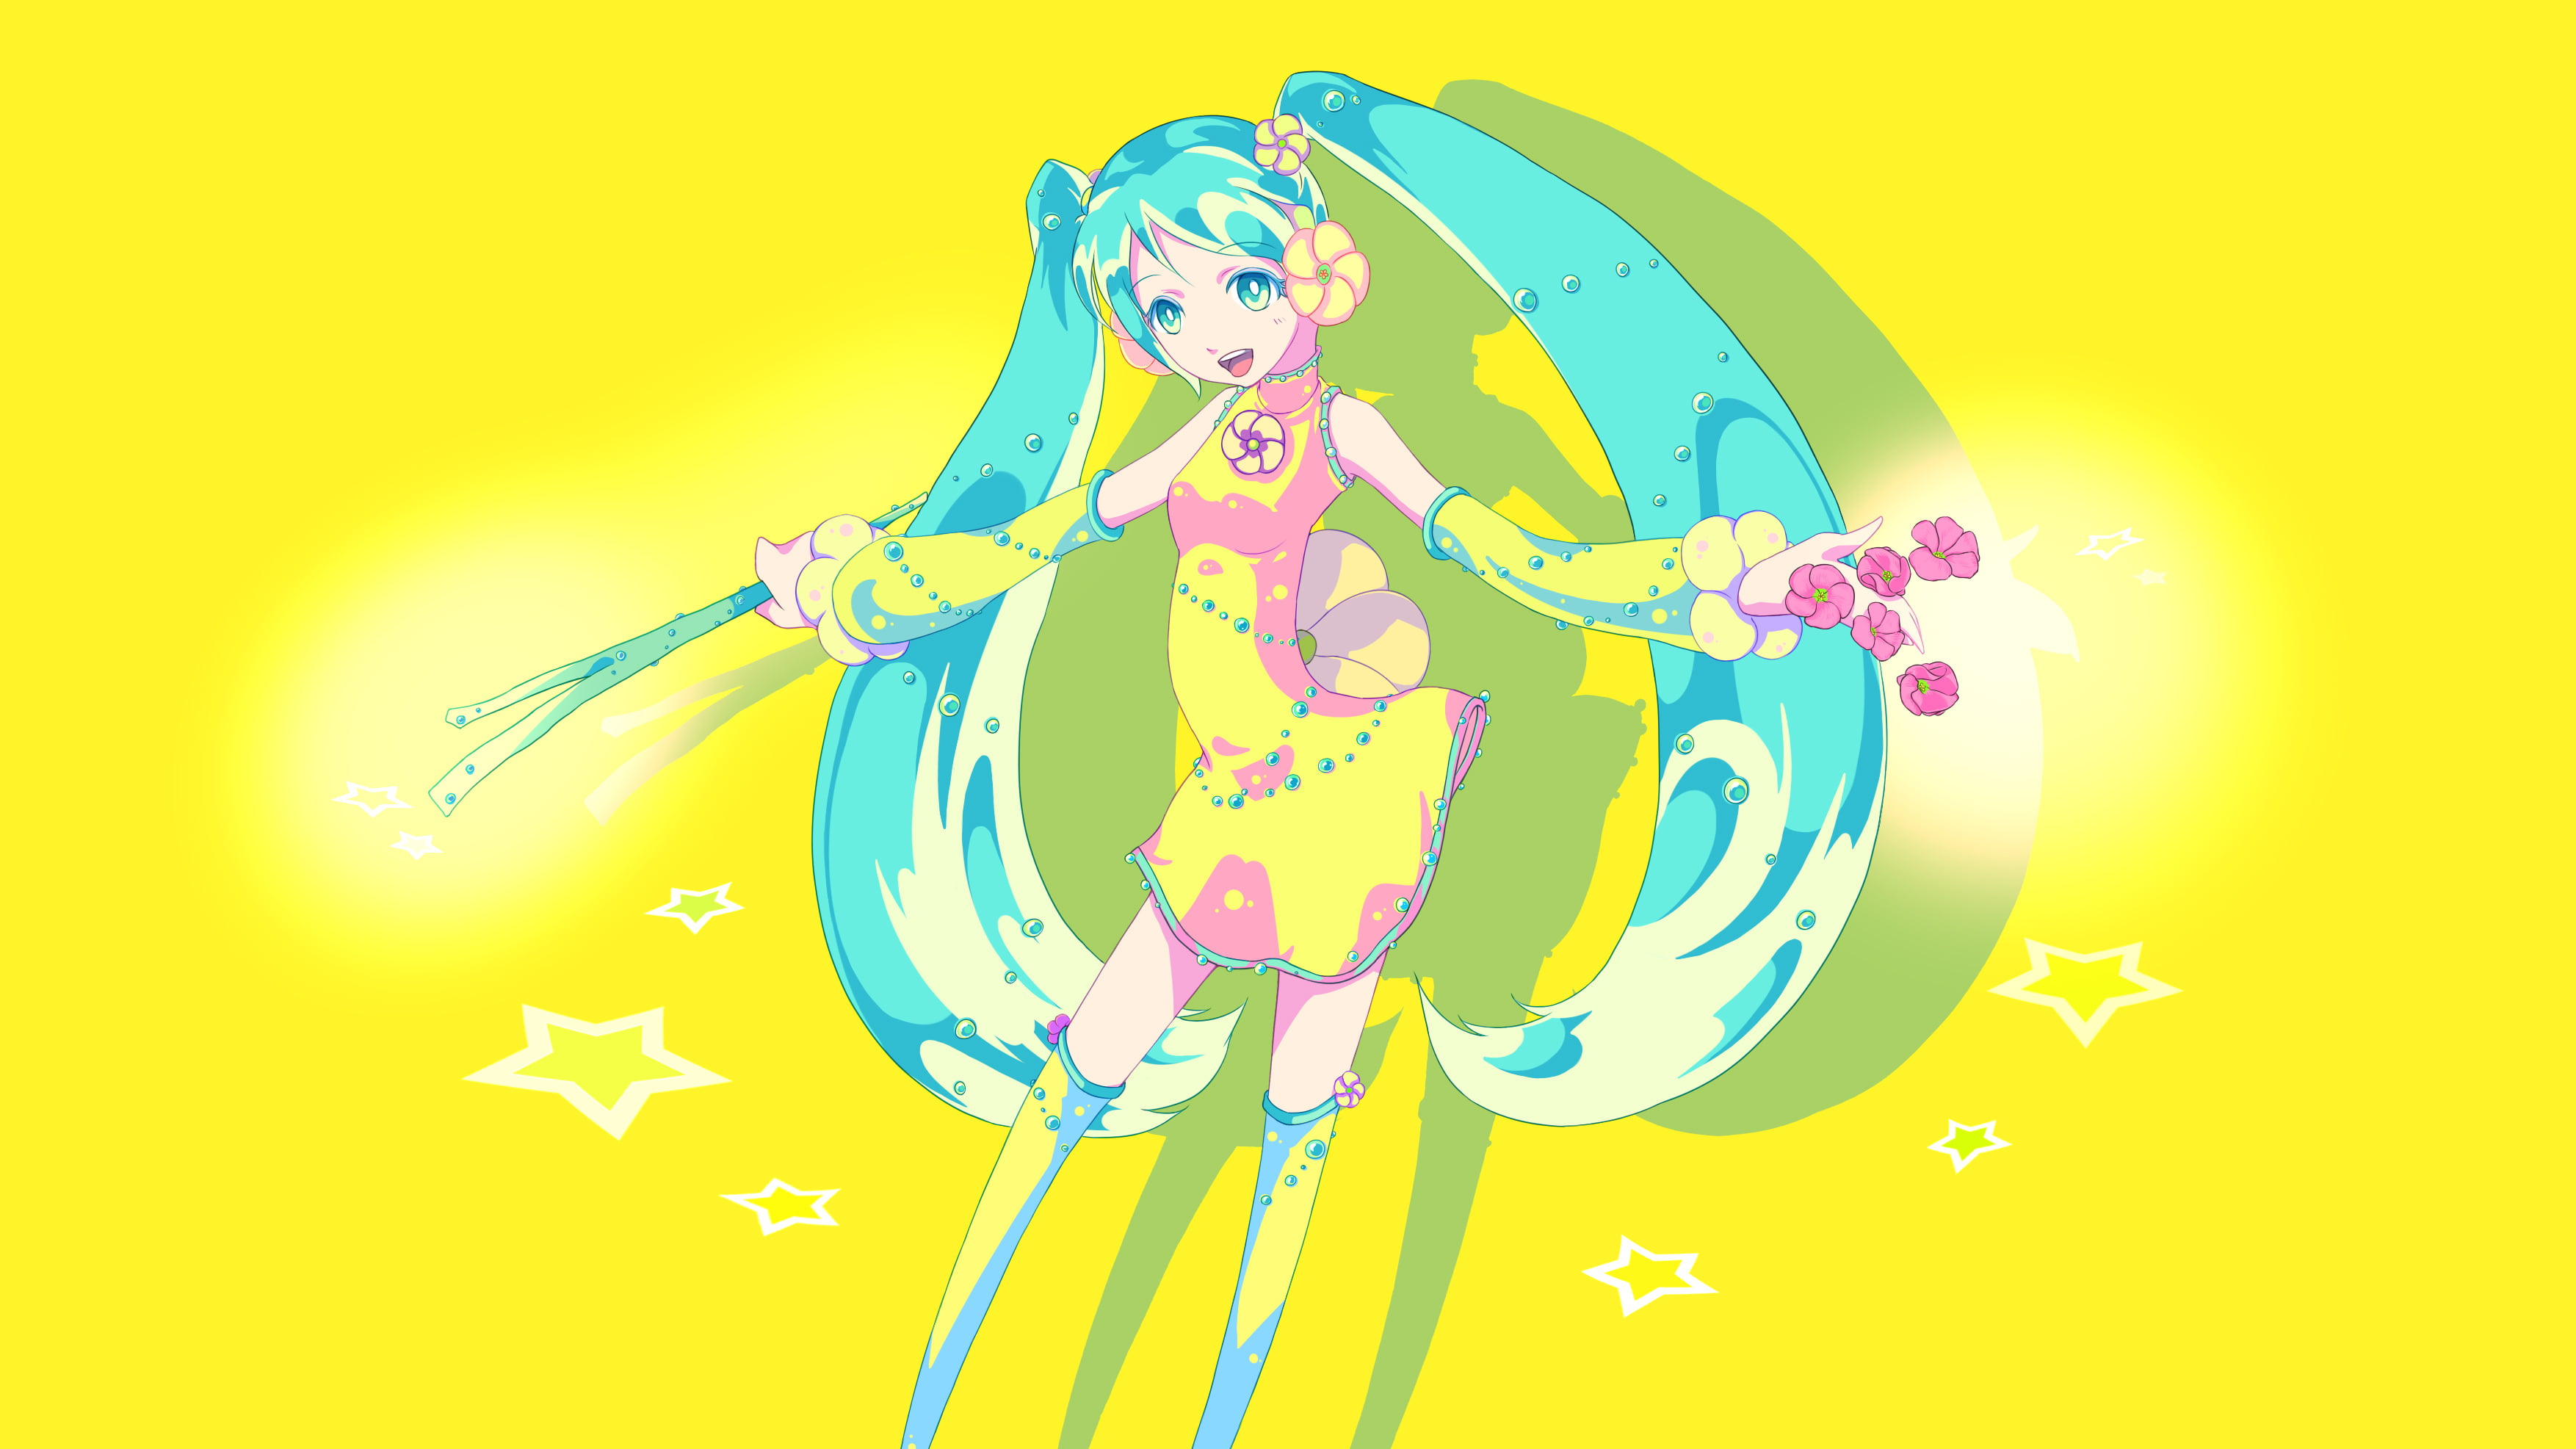 Anime girl with blue hair and yellow dress - wide 5